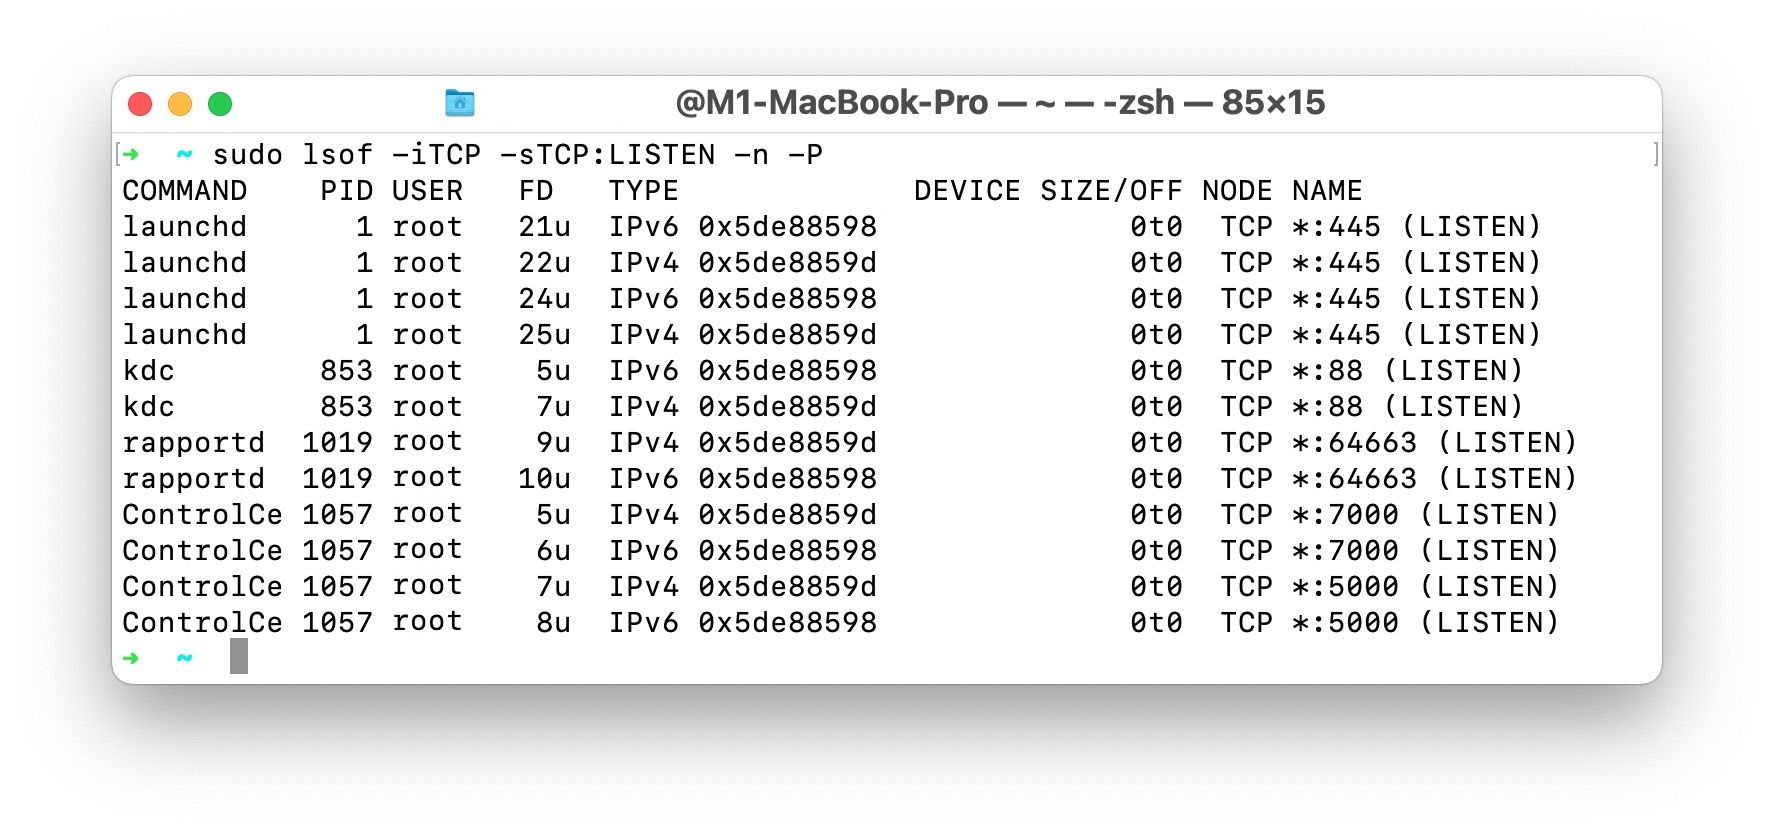 How to Find Who/What is Listening on TCP Ports on Mac